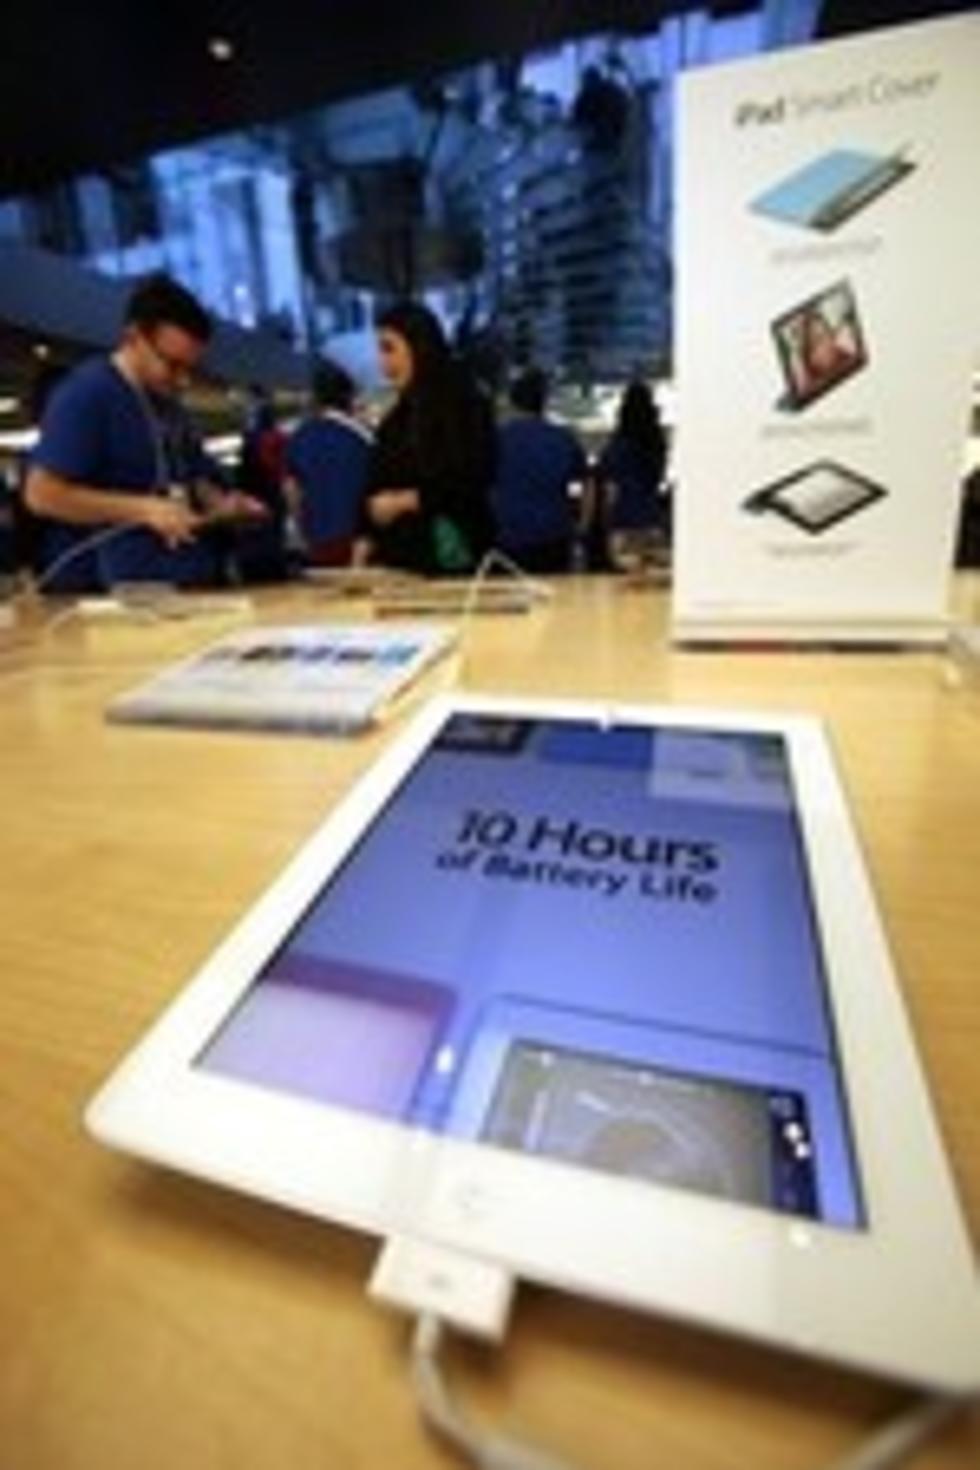 iPad 3 could launch soon…with issues?